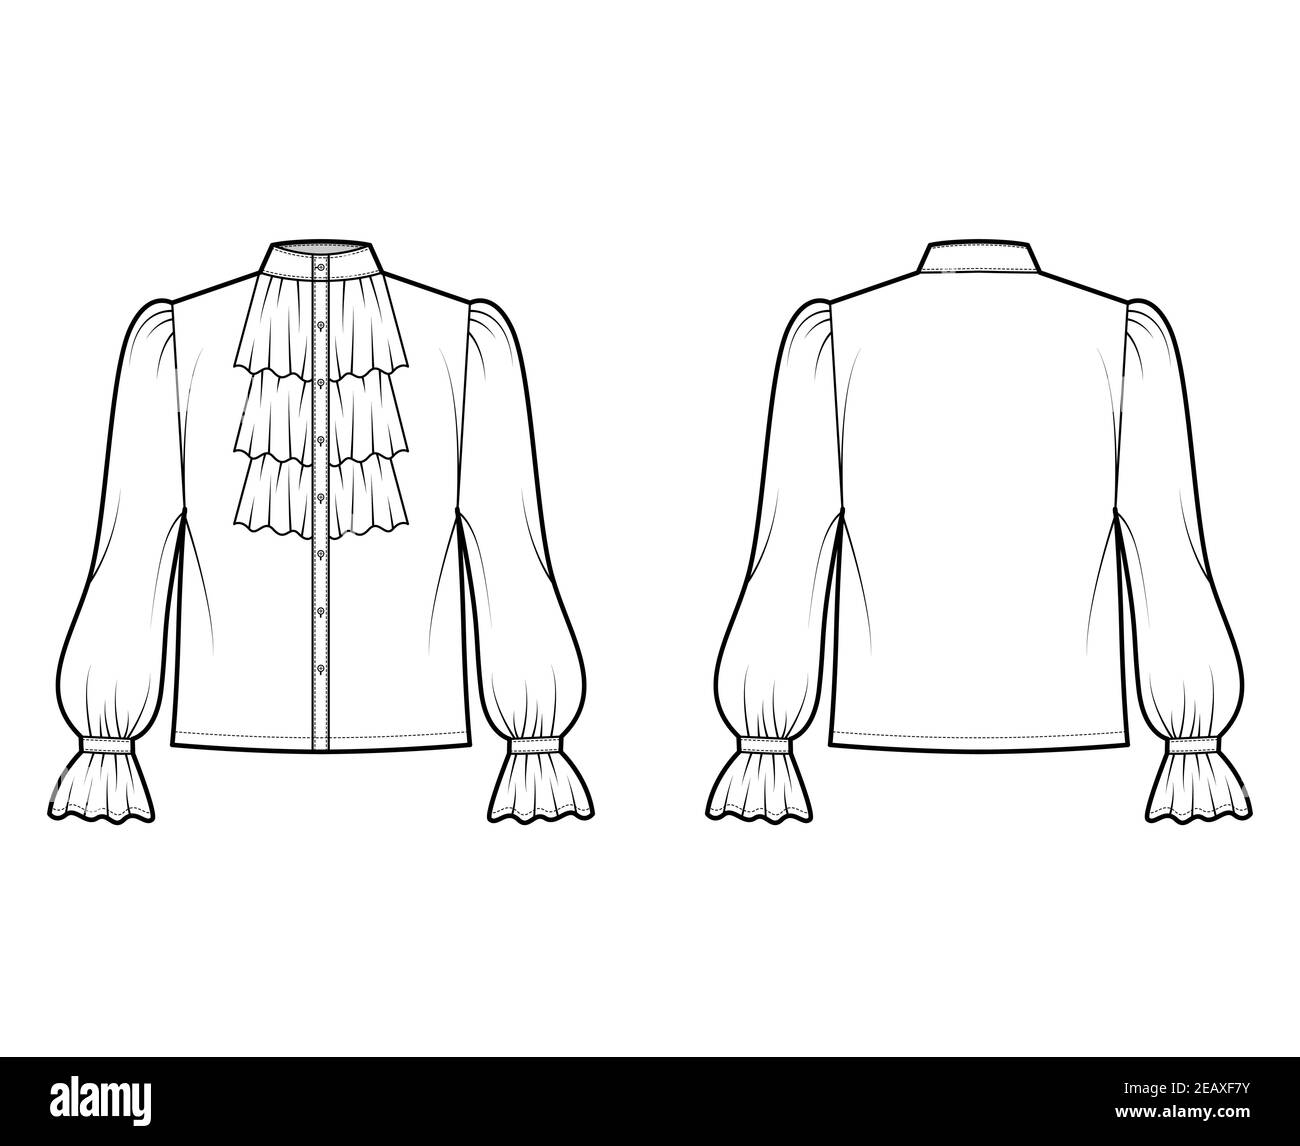 Poet pirate blouse technical fashion illustration with ruffles collar,  bishop long sleeves, stand neck, loose fit,